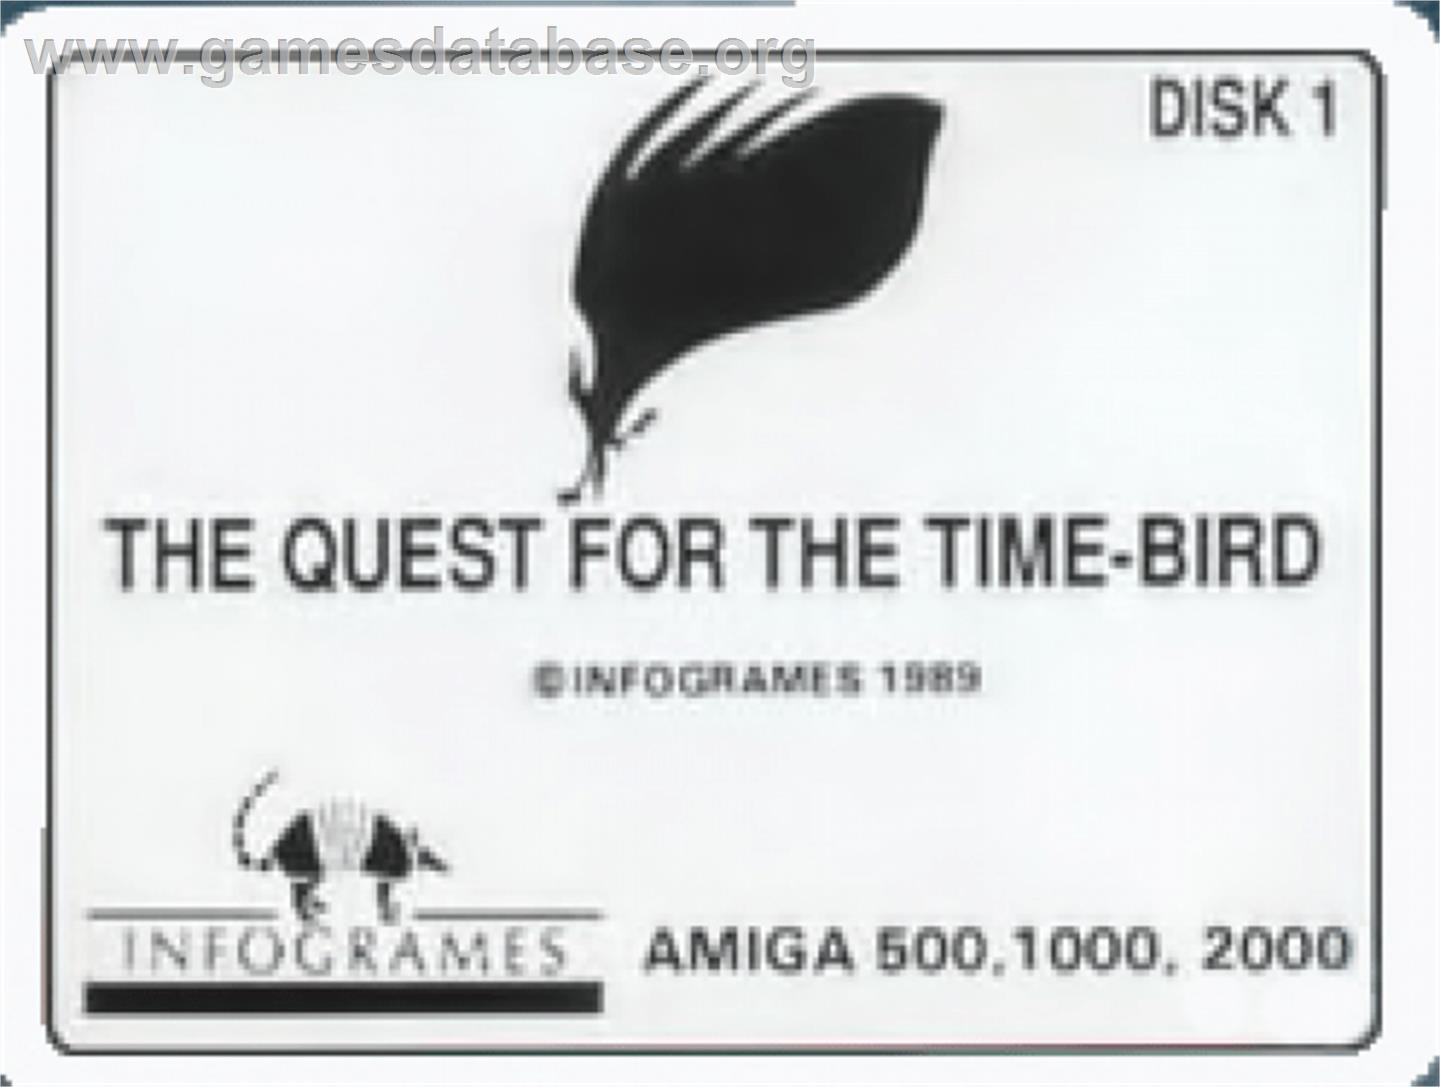 Quest for the Time-bird - Commodore Amiga - Artwork - Cartridge Top